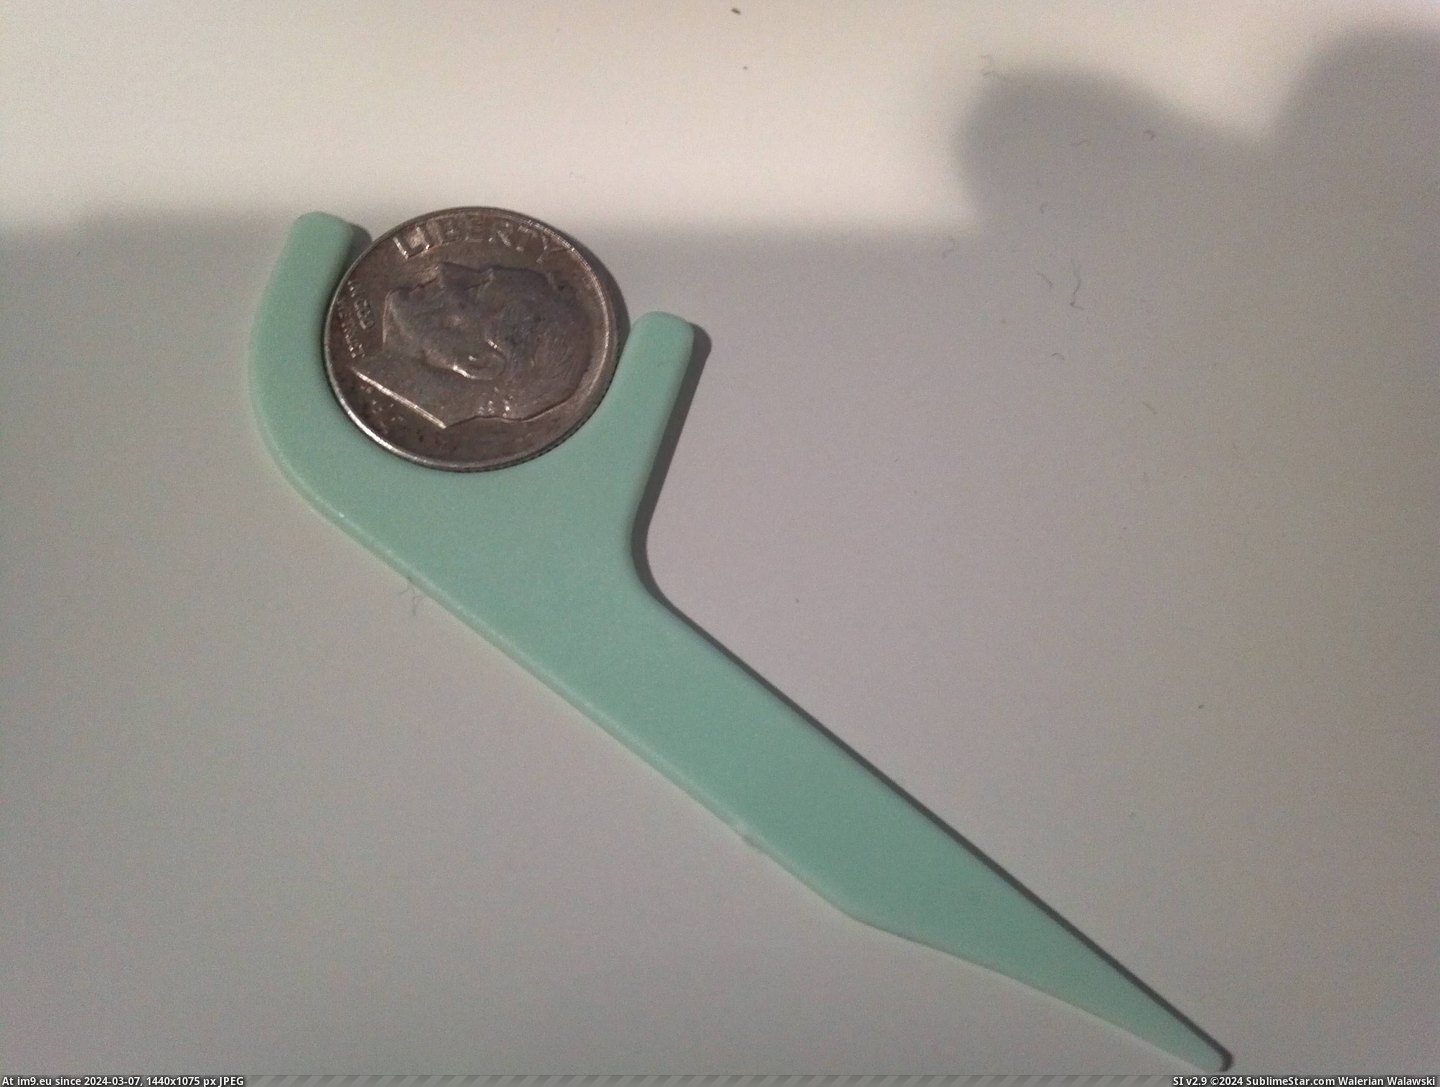 #Pick #Perfectly #Dime #Floss #Curvature #Fits #Dental [Mildlyinteresting] A dime fits perfectly in the curvature of this dental floss pick Pic. (Bild von album My r/MILDLYINTERESTING favs))